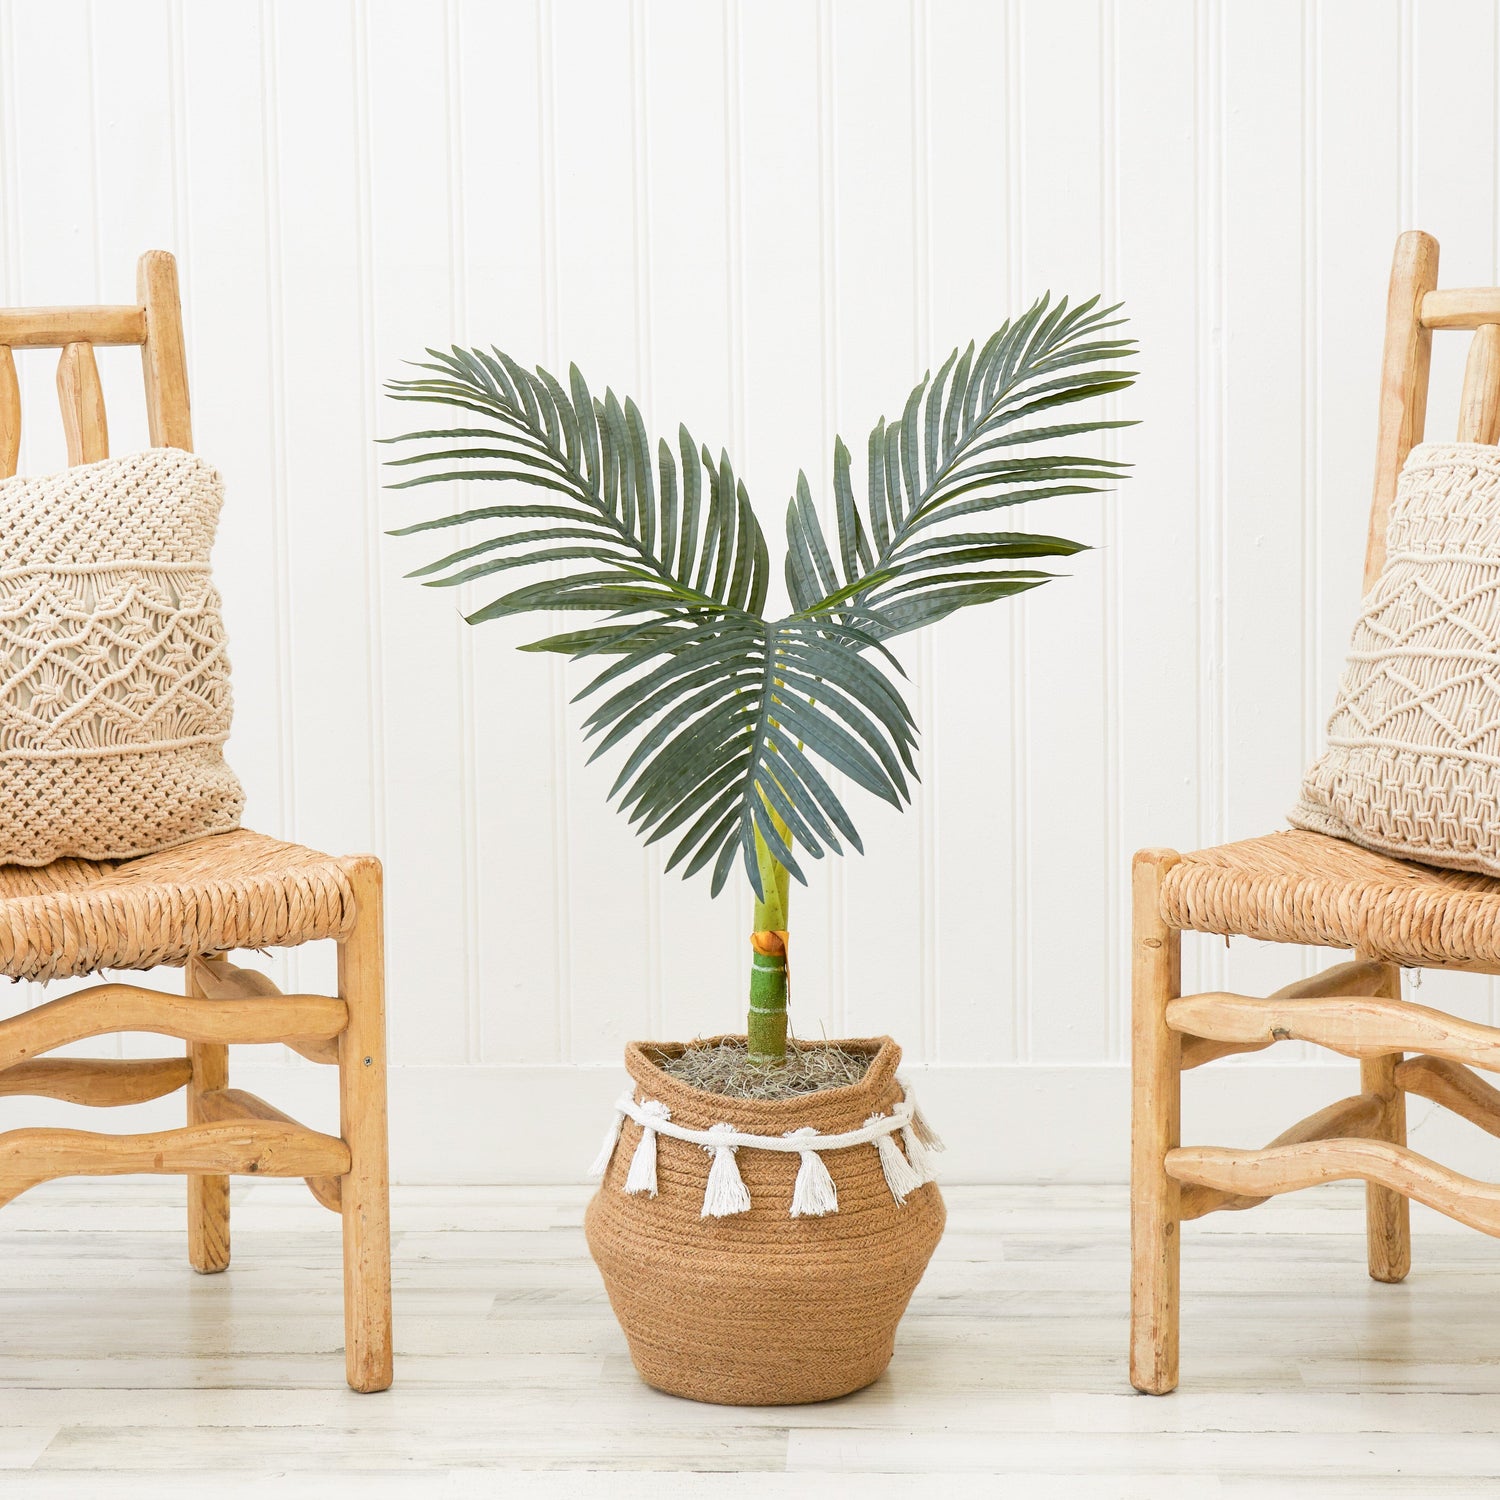 3' Artificial Golden Cane Palm Tree with Handmade Jute & Cotton Basket with Tassels DIY KIT